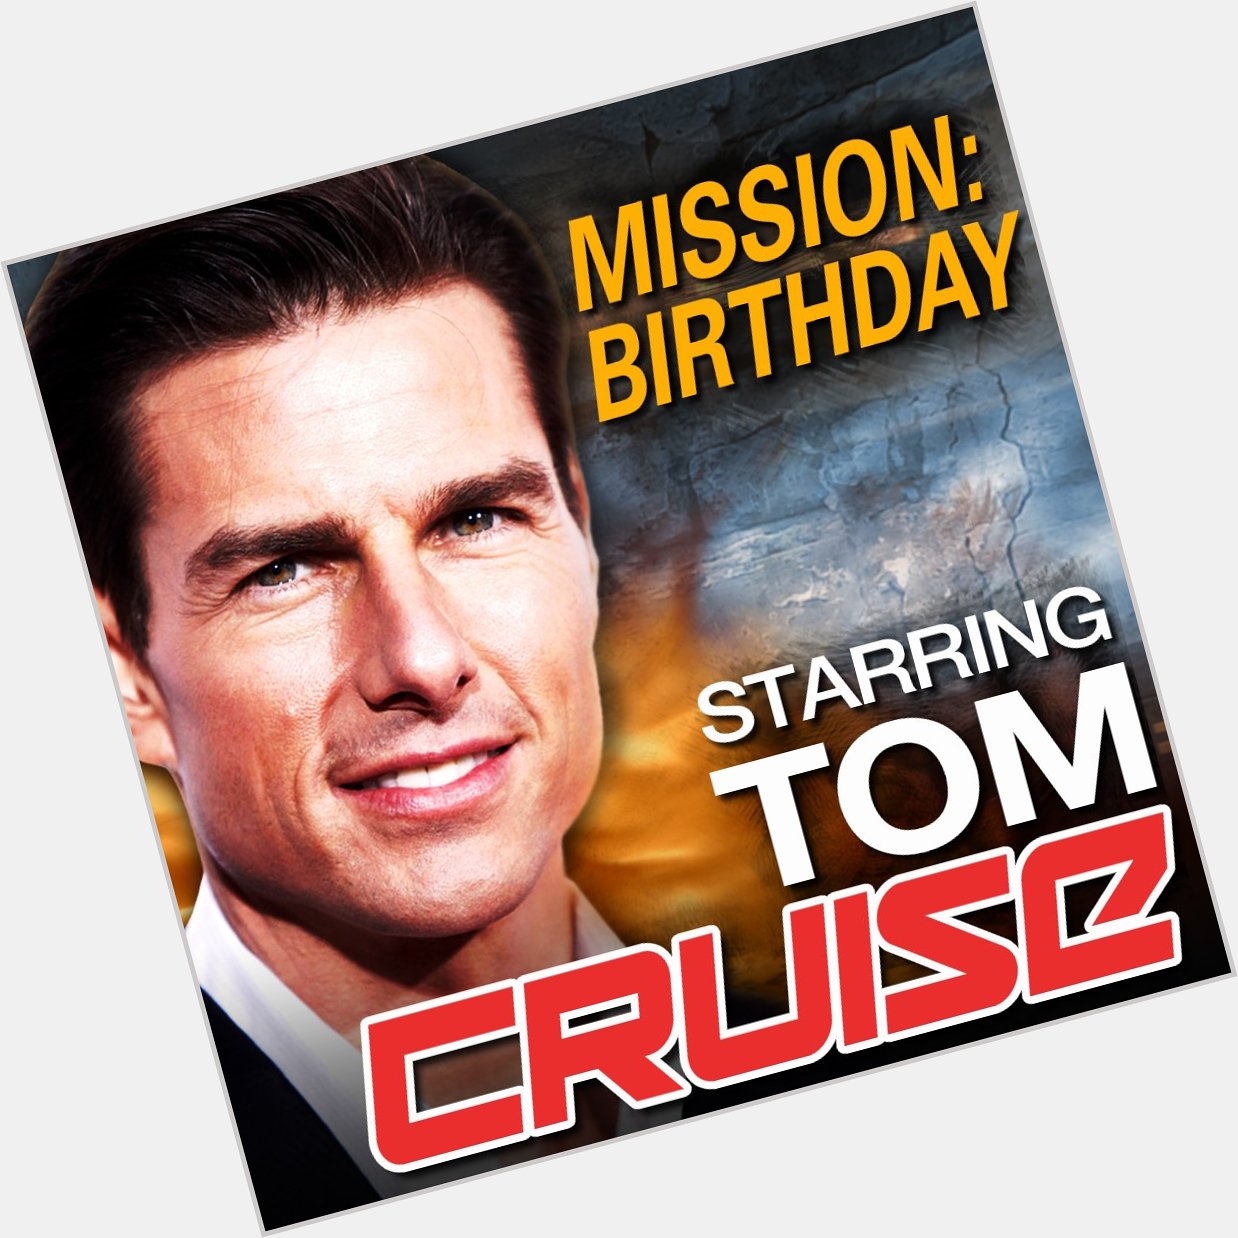 Happy birthday, Tom Cruise! The actor turns 55 today 